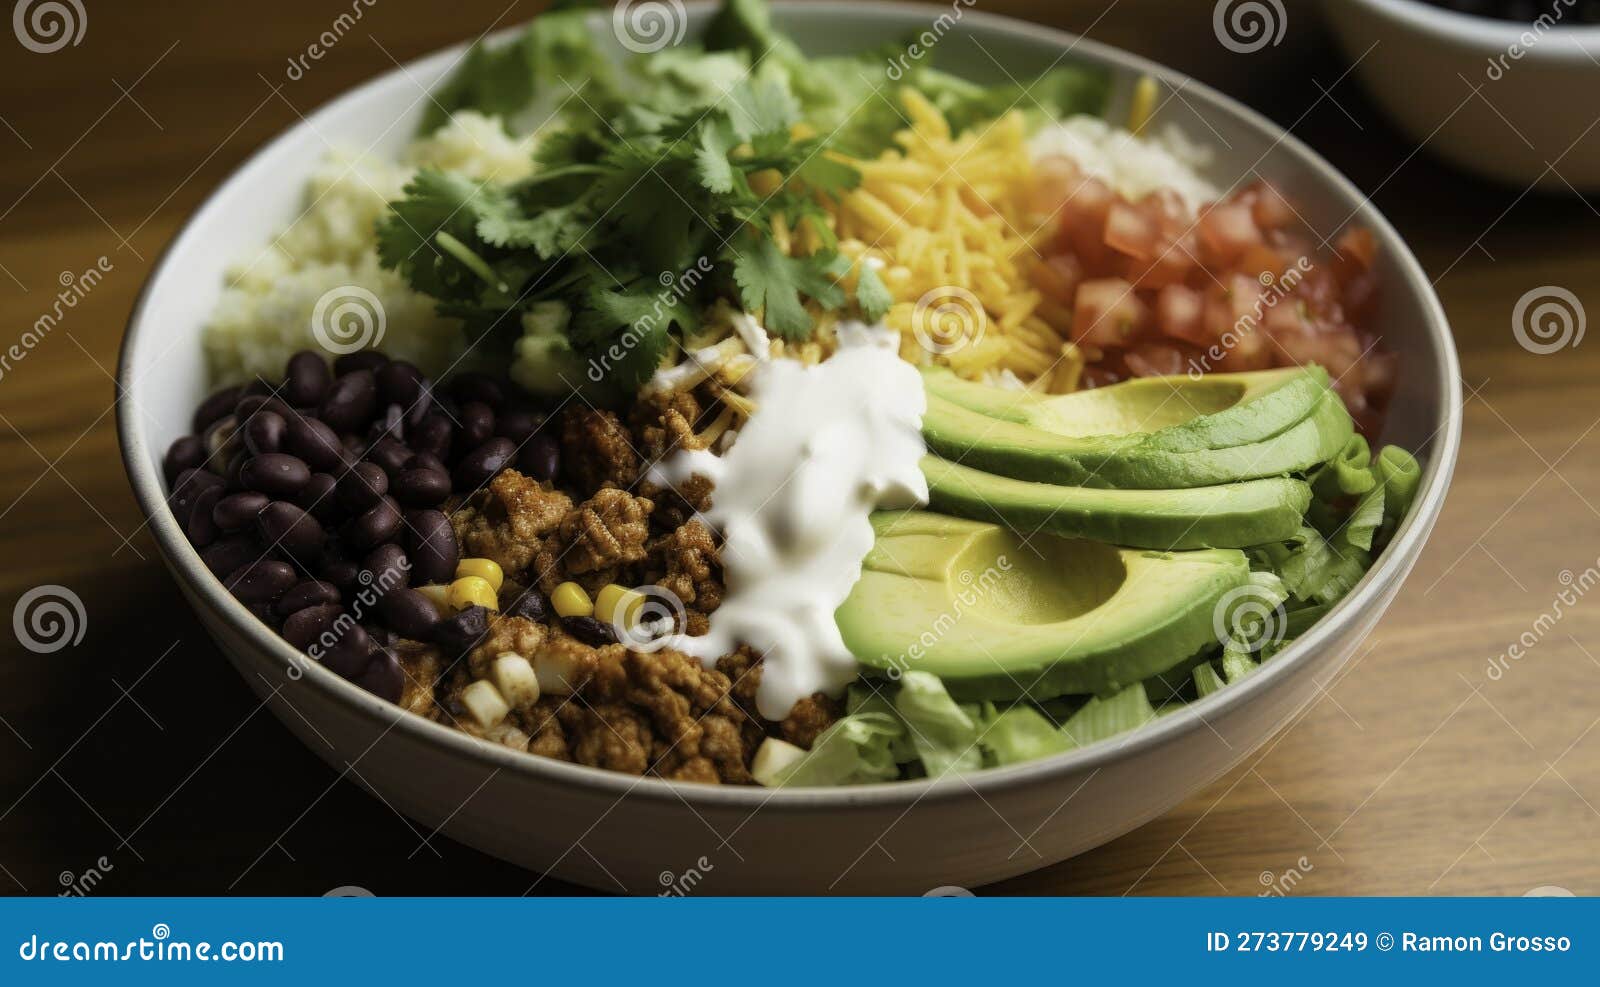 texmex ground meat mexican food